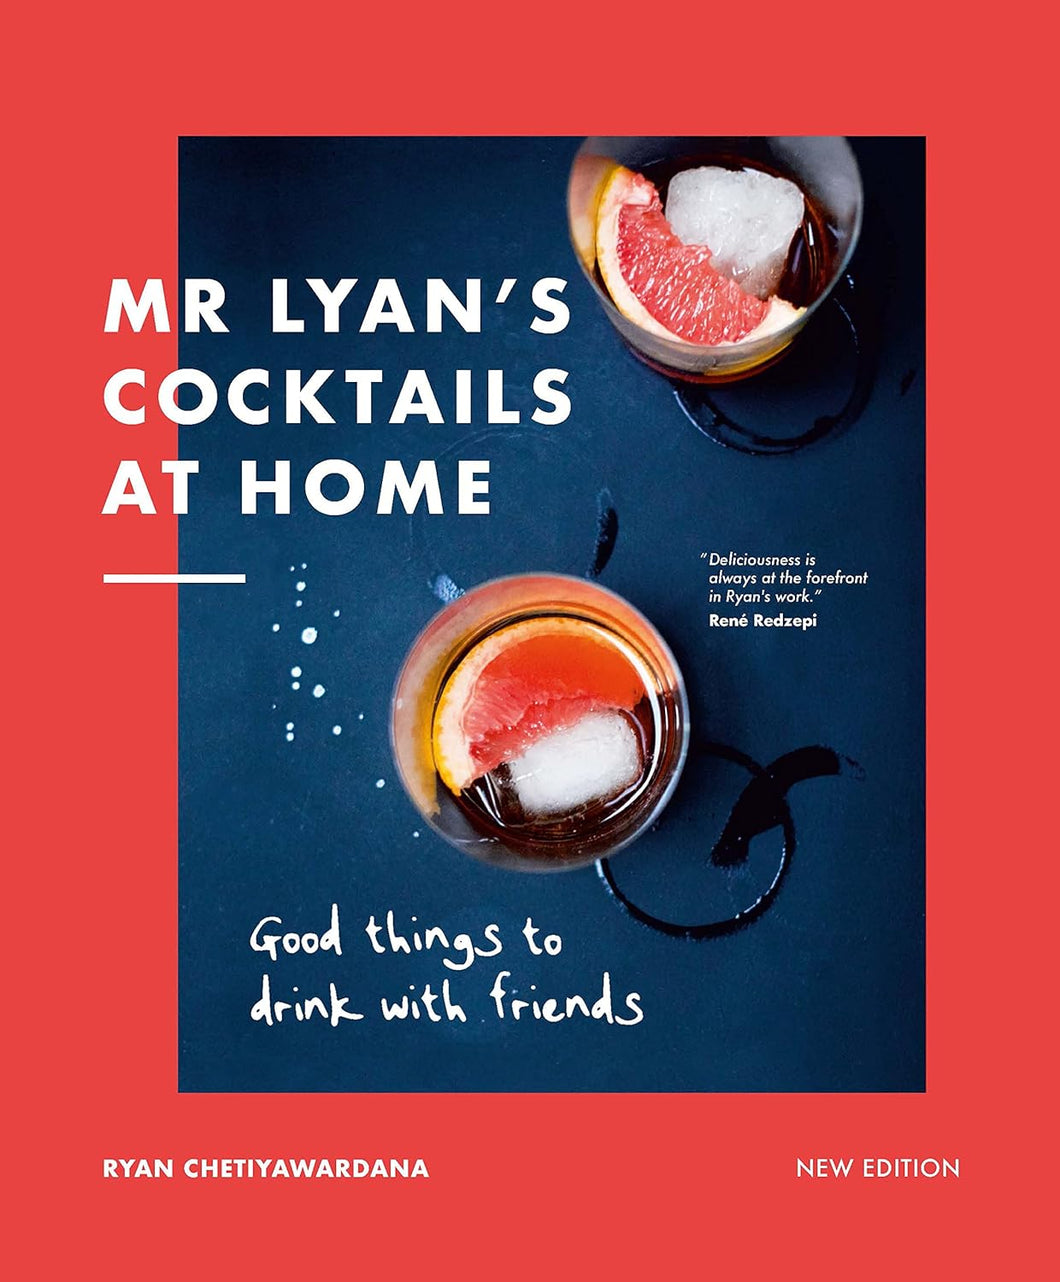 Mr Lyan’s Cocktails at Home: Good Things to Drink with Friends by Ryan Chetiyawardana